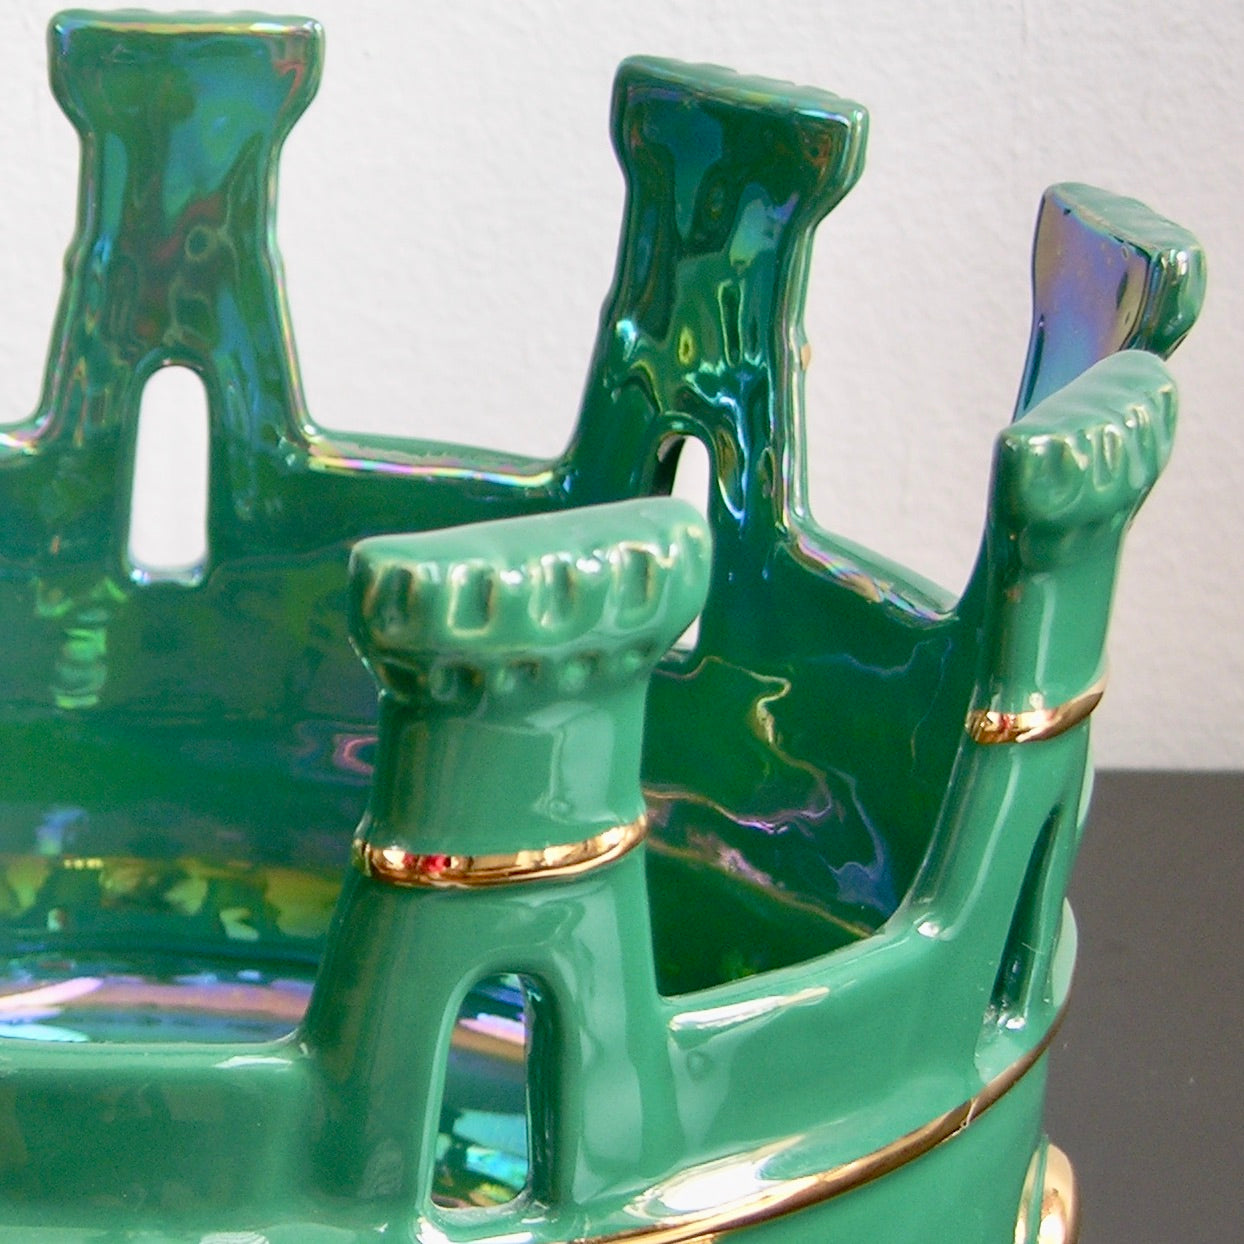 Contemporary Italian Hunter Green Majolica Crown Bowl with Pure Gold Accents